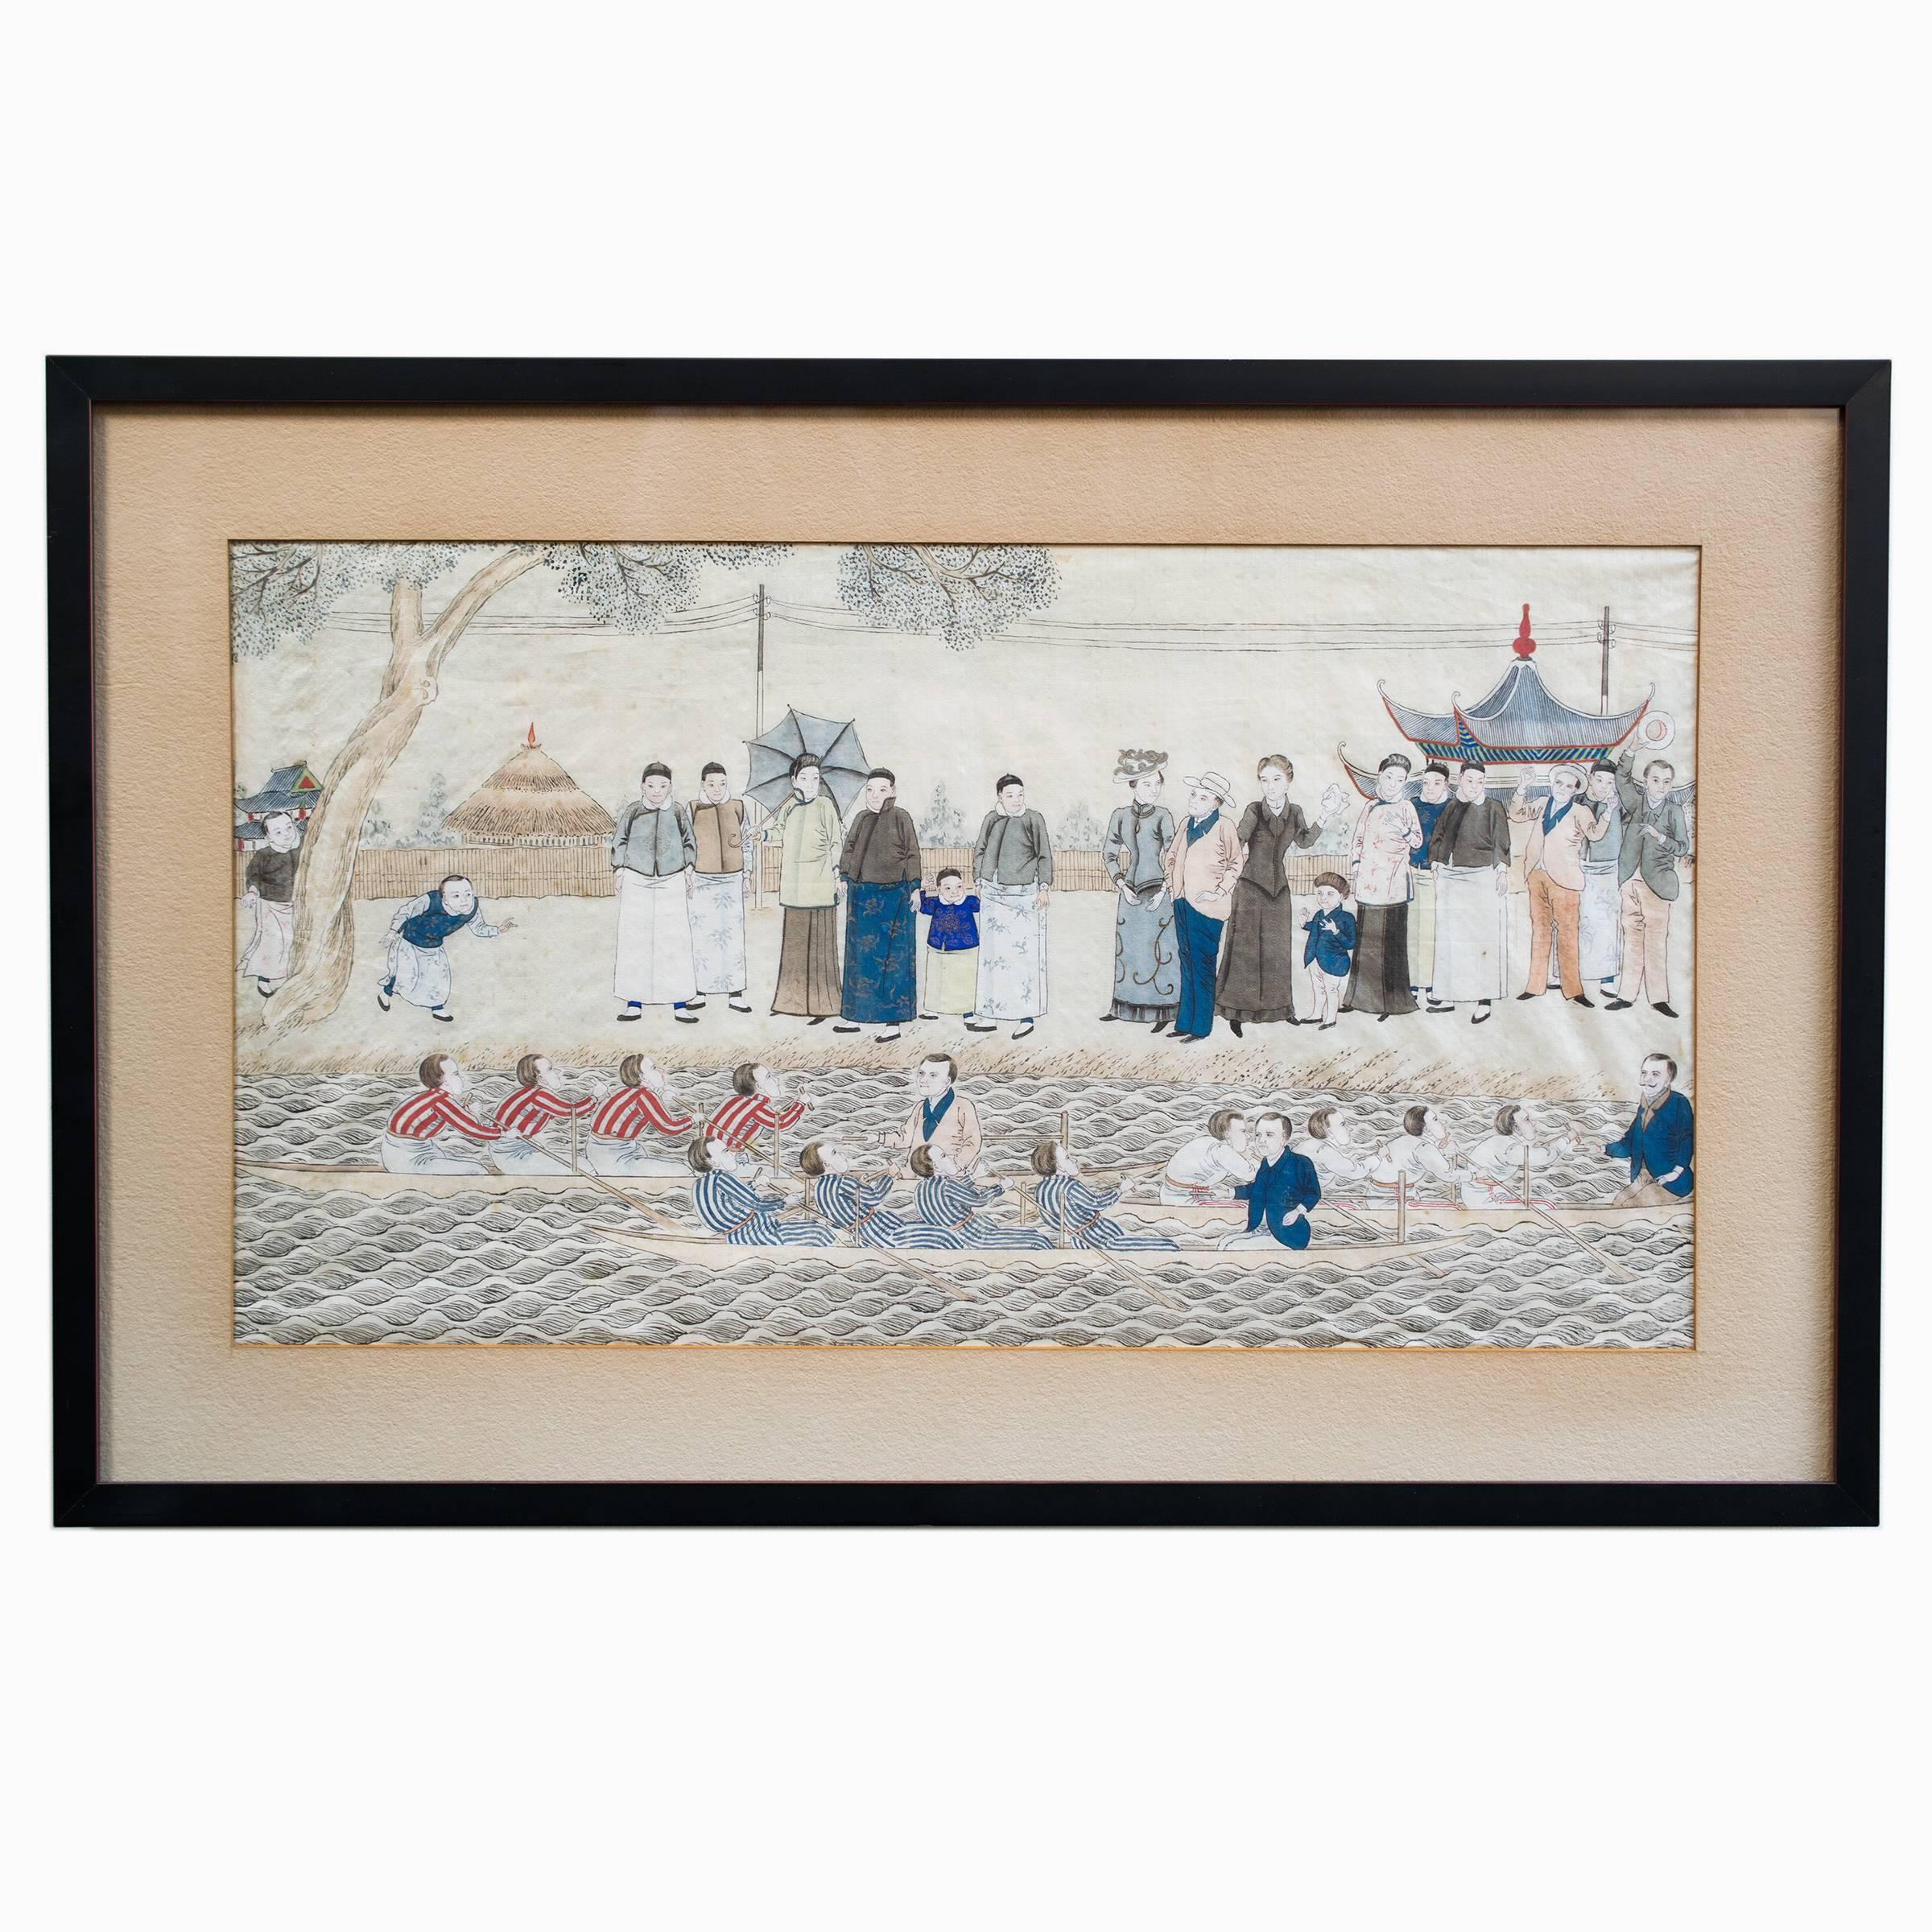 These exquisite paintings date to a period during the Qing dynasty when Chinese artists began using traditional art forms to illustrate Western traditions a departure from the traditional subjects of nature and landscape. These paintings illustrate